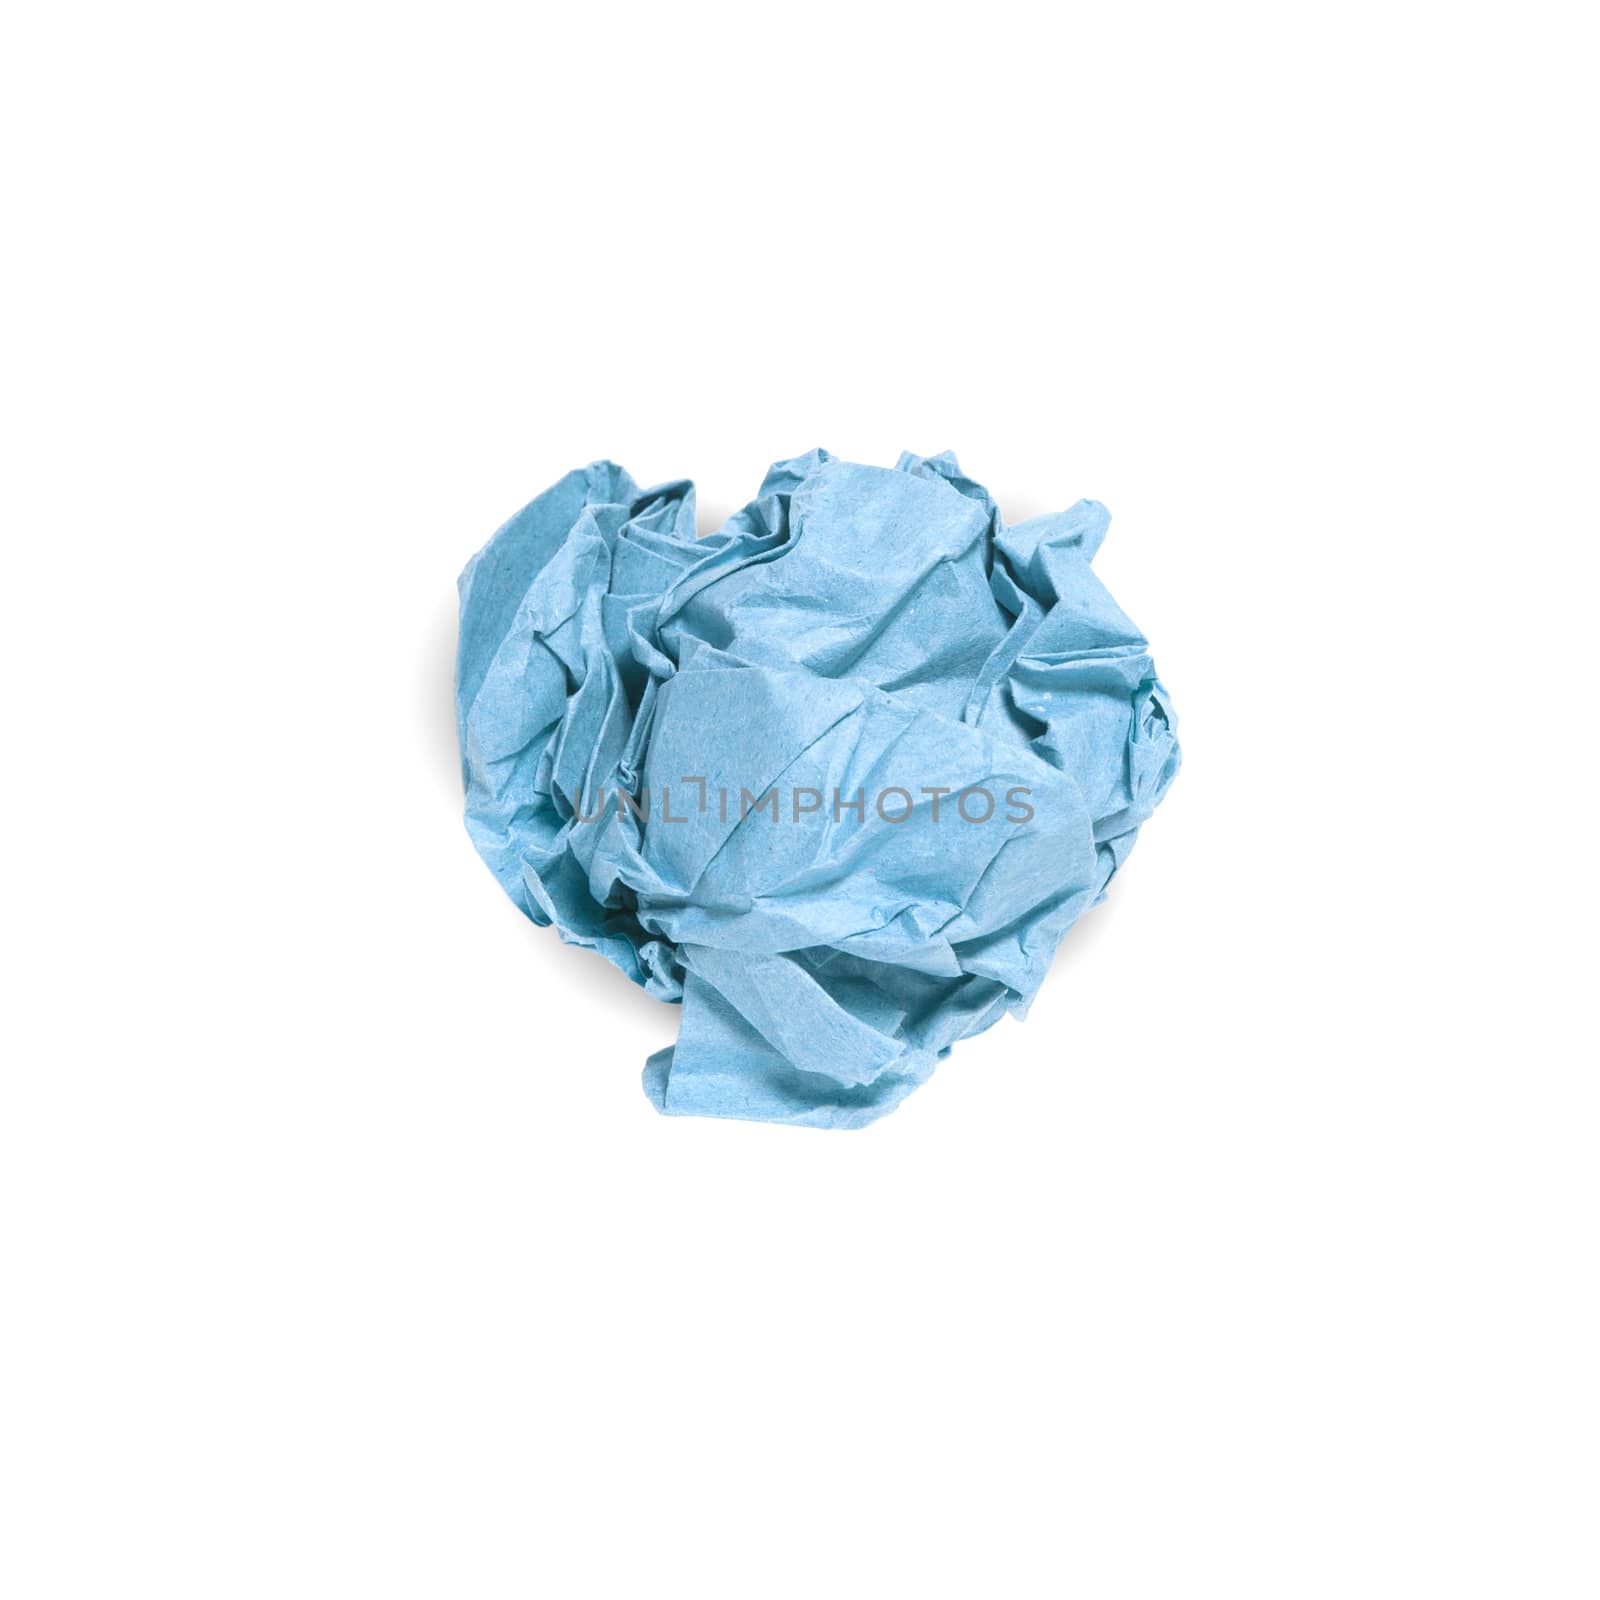 Crumpled blue paper ball isolated over white background. Bluren concept